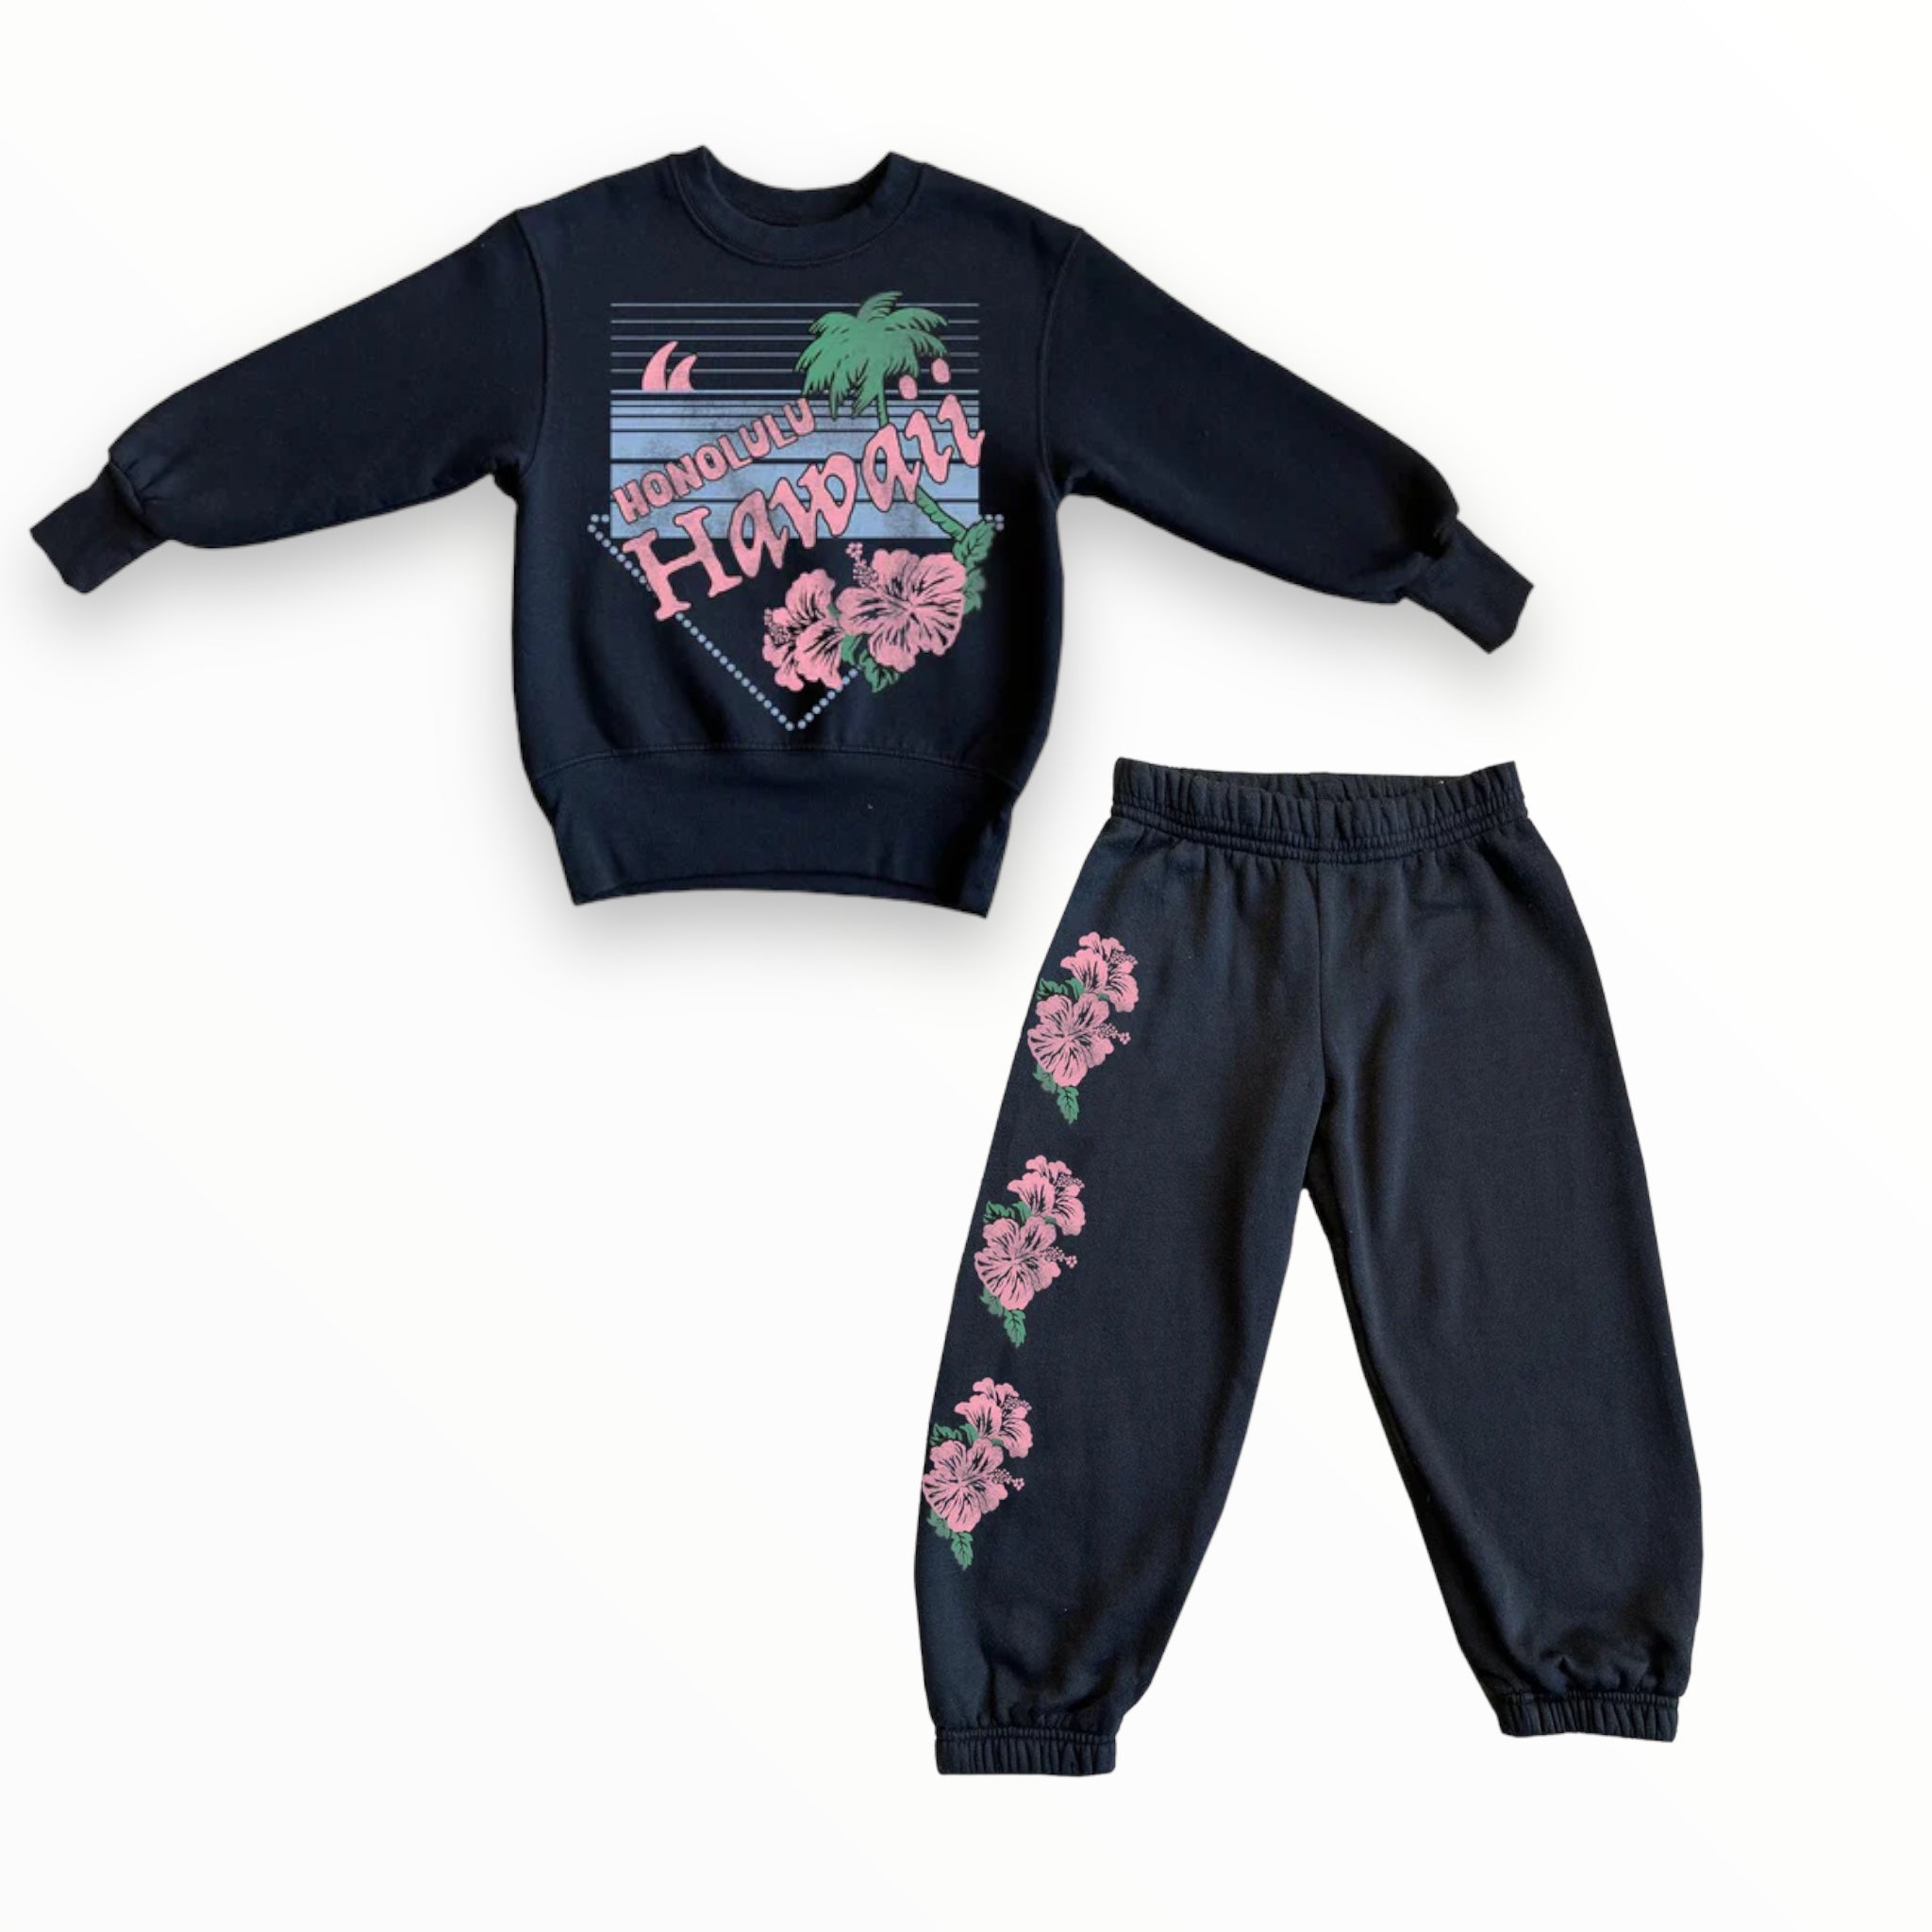 ROWDY SPROUT HAWAII SWEATPANT - BLACK